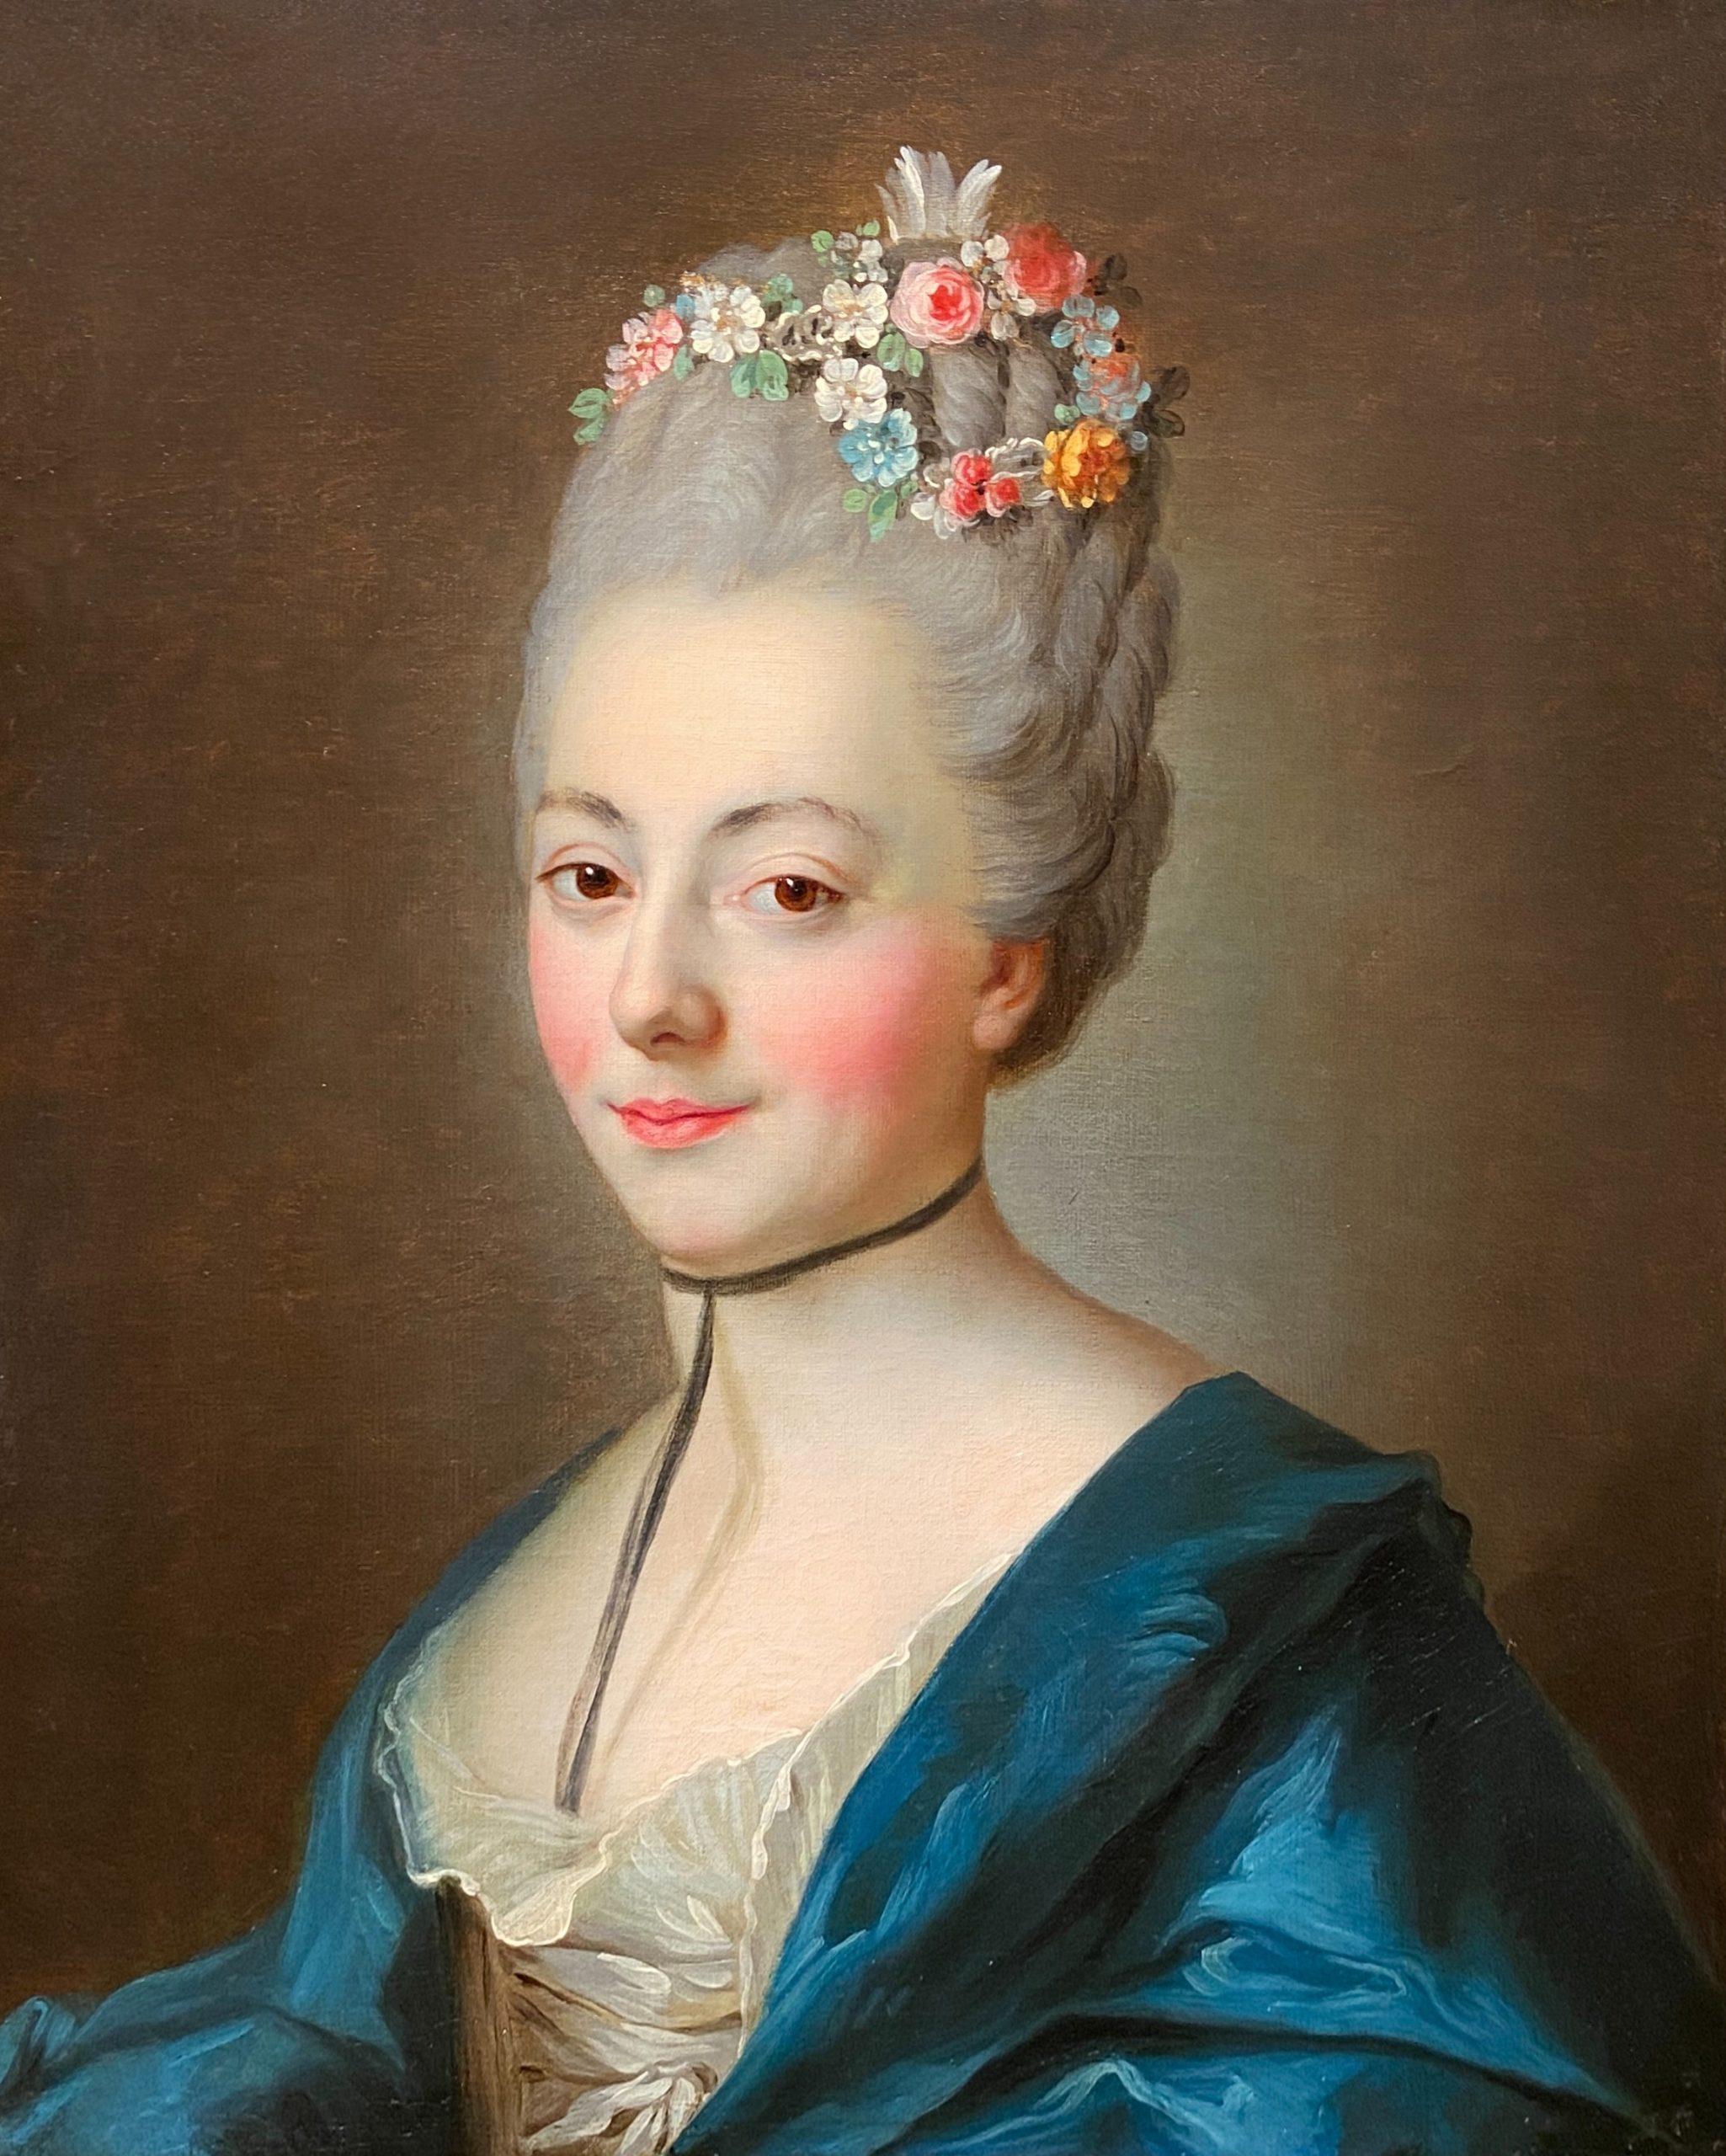 Alexander Roslin Portrait Painting - Portrait of a Lady with her Hair Adorned with Flowers, 18th Century French